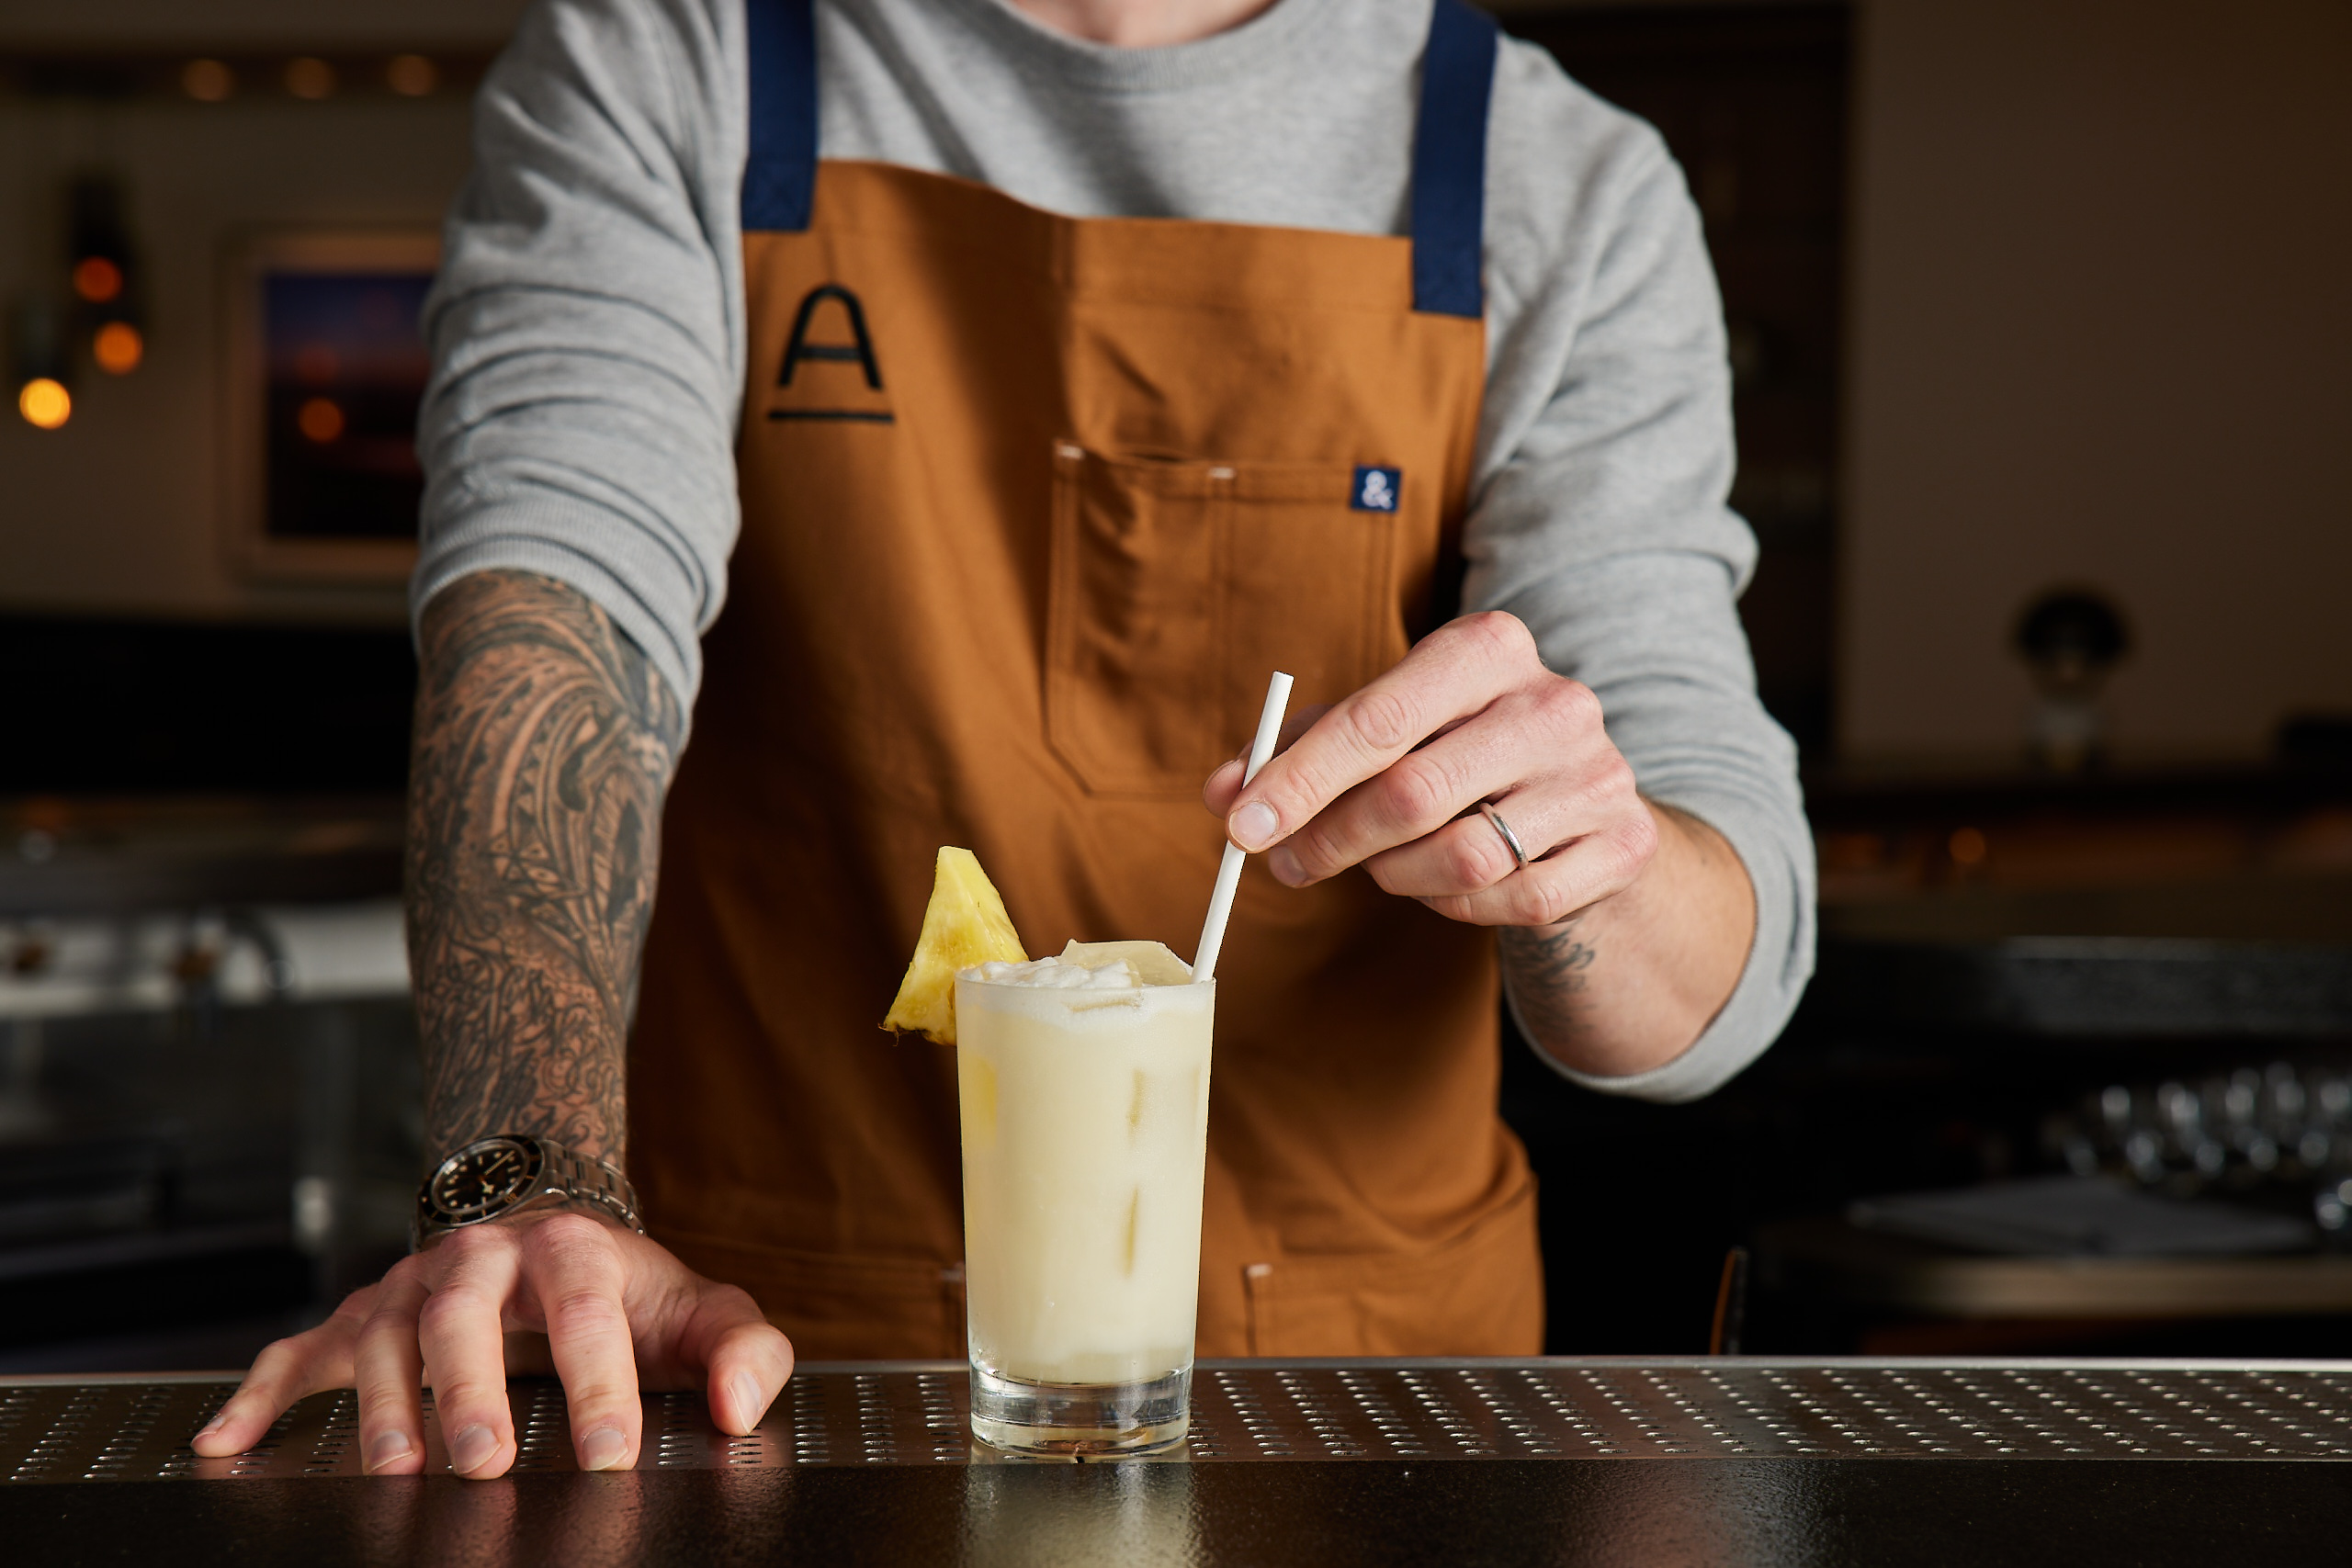 Pineapple Booster Cocktail at Roger Restaurant and Bar (Photo Credit: Jessica Sample / The Ameswell Hotel)